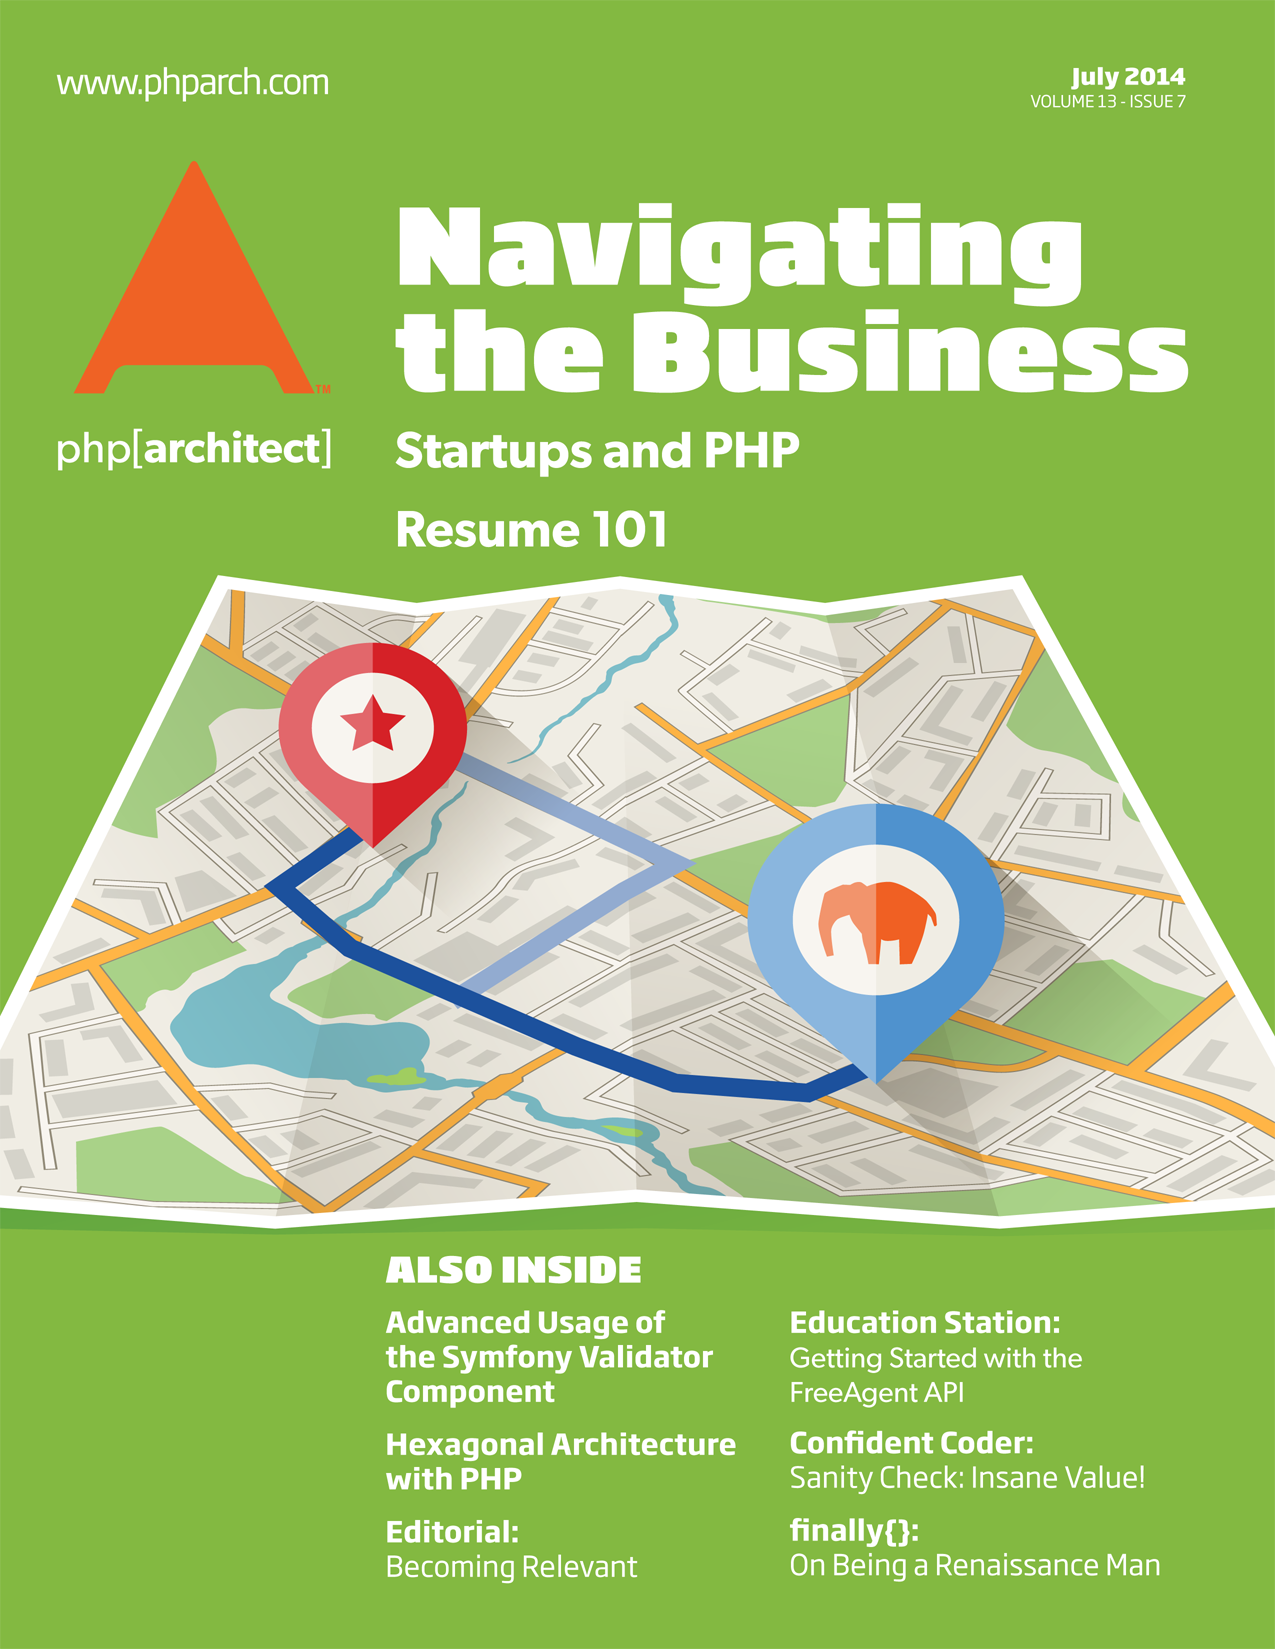 php[architect] July 2014 - Navigating the Business